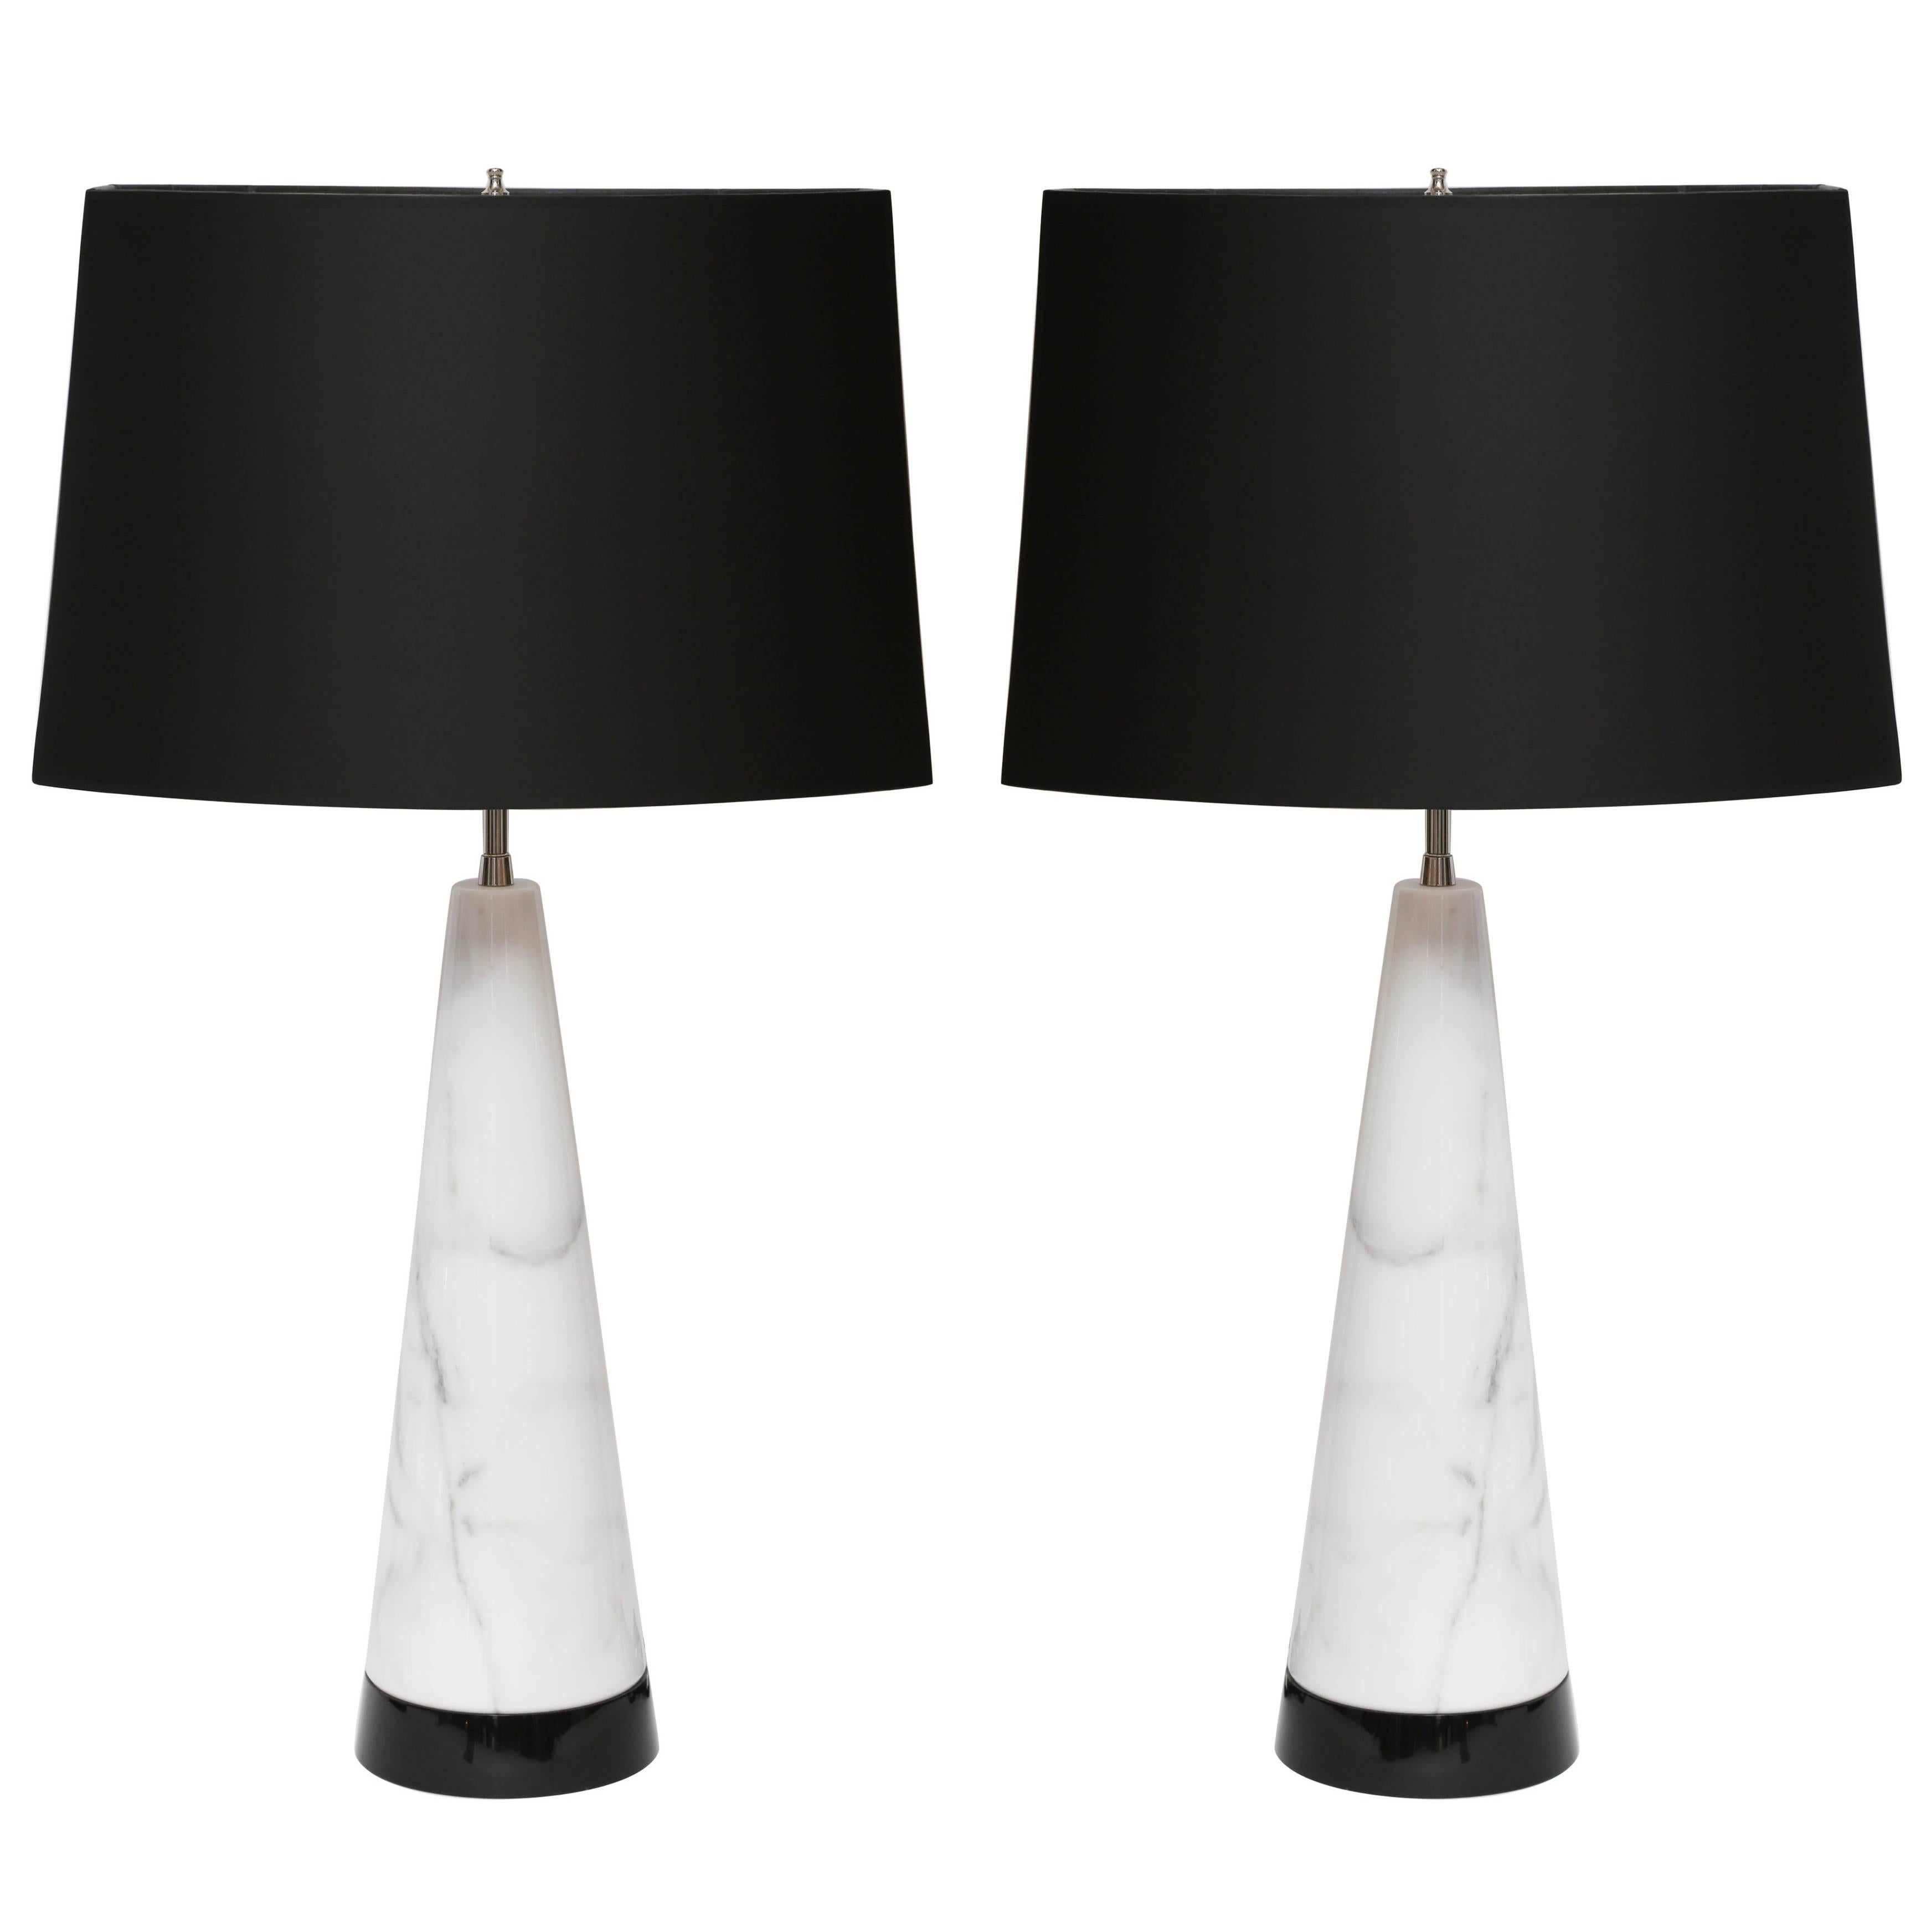 Superb Pair of White Italian Marble Cone Table Lamps